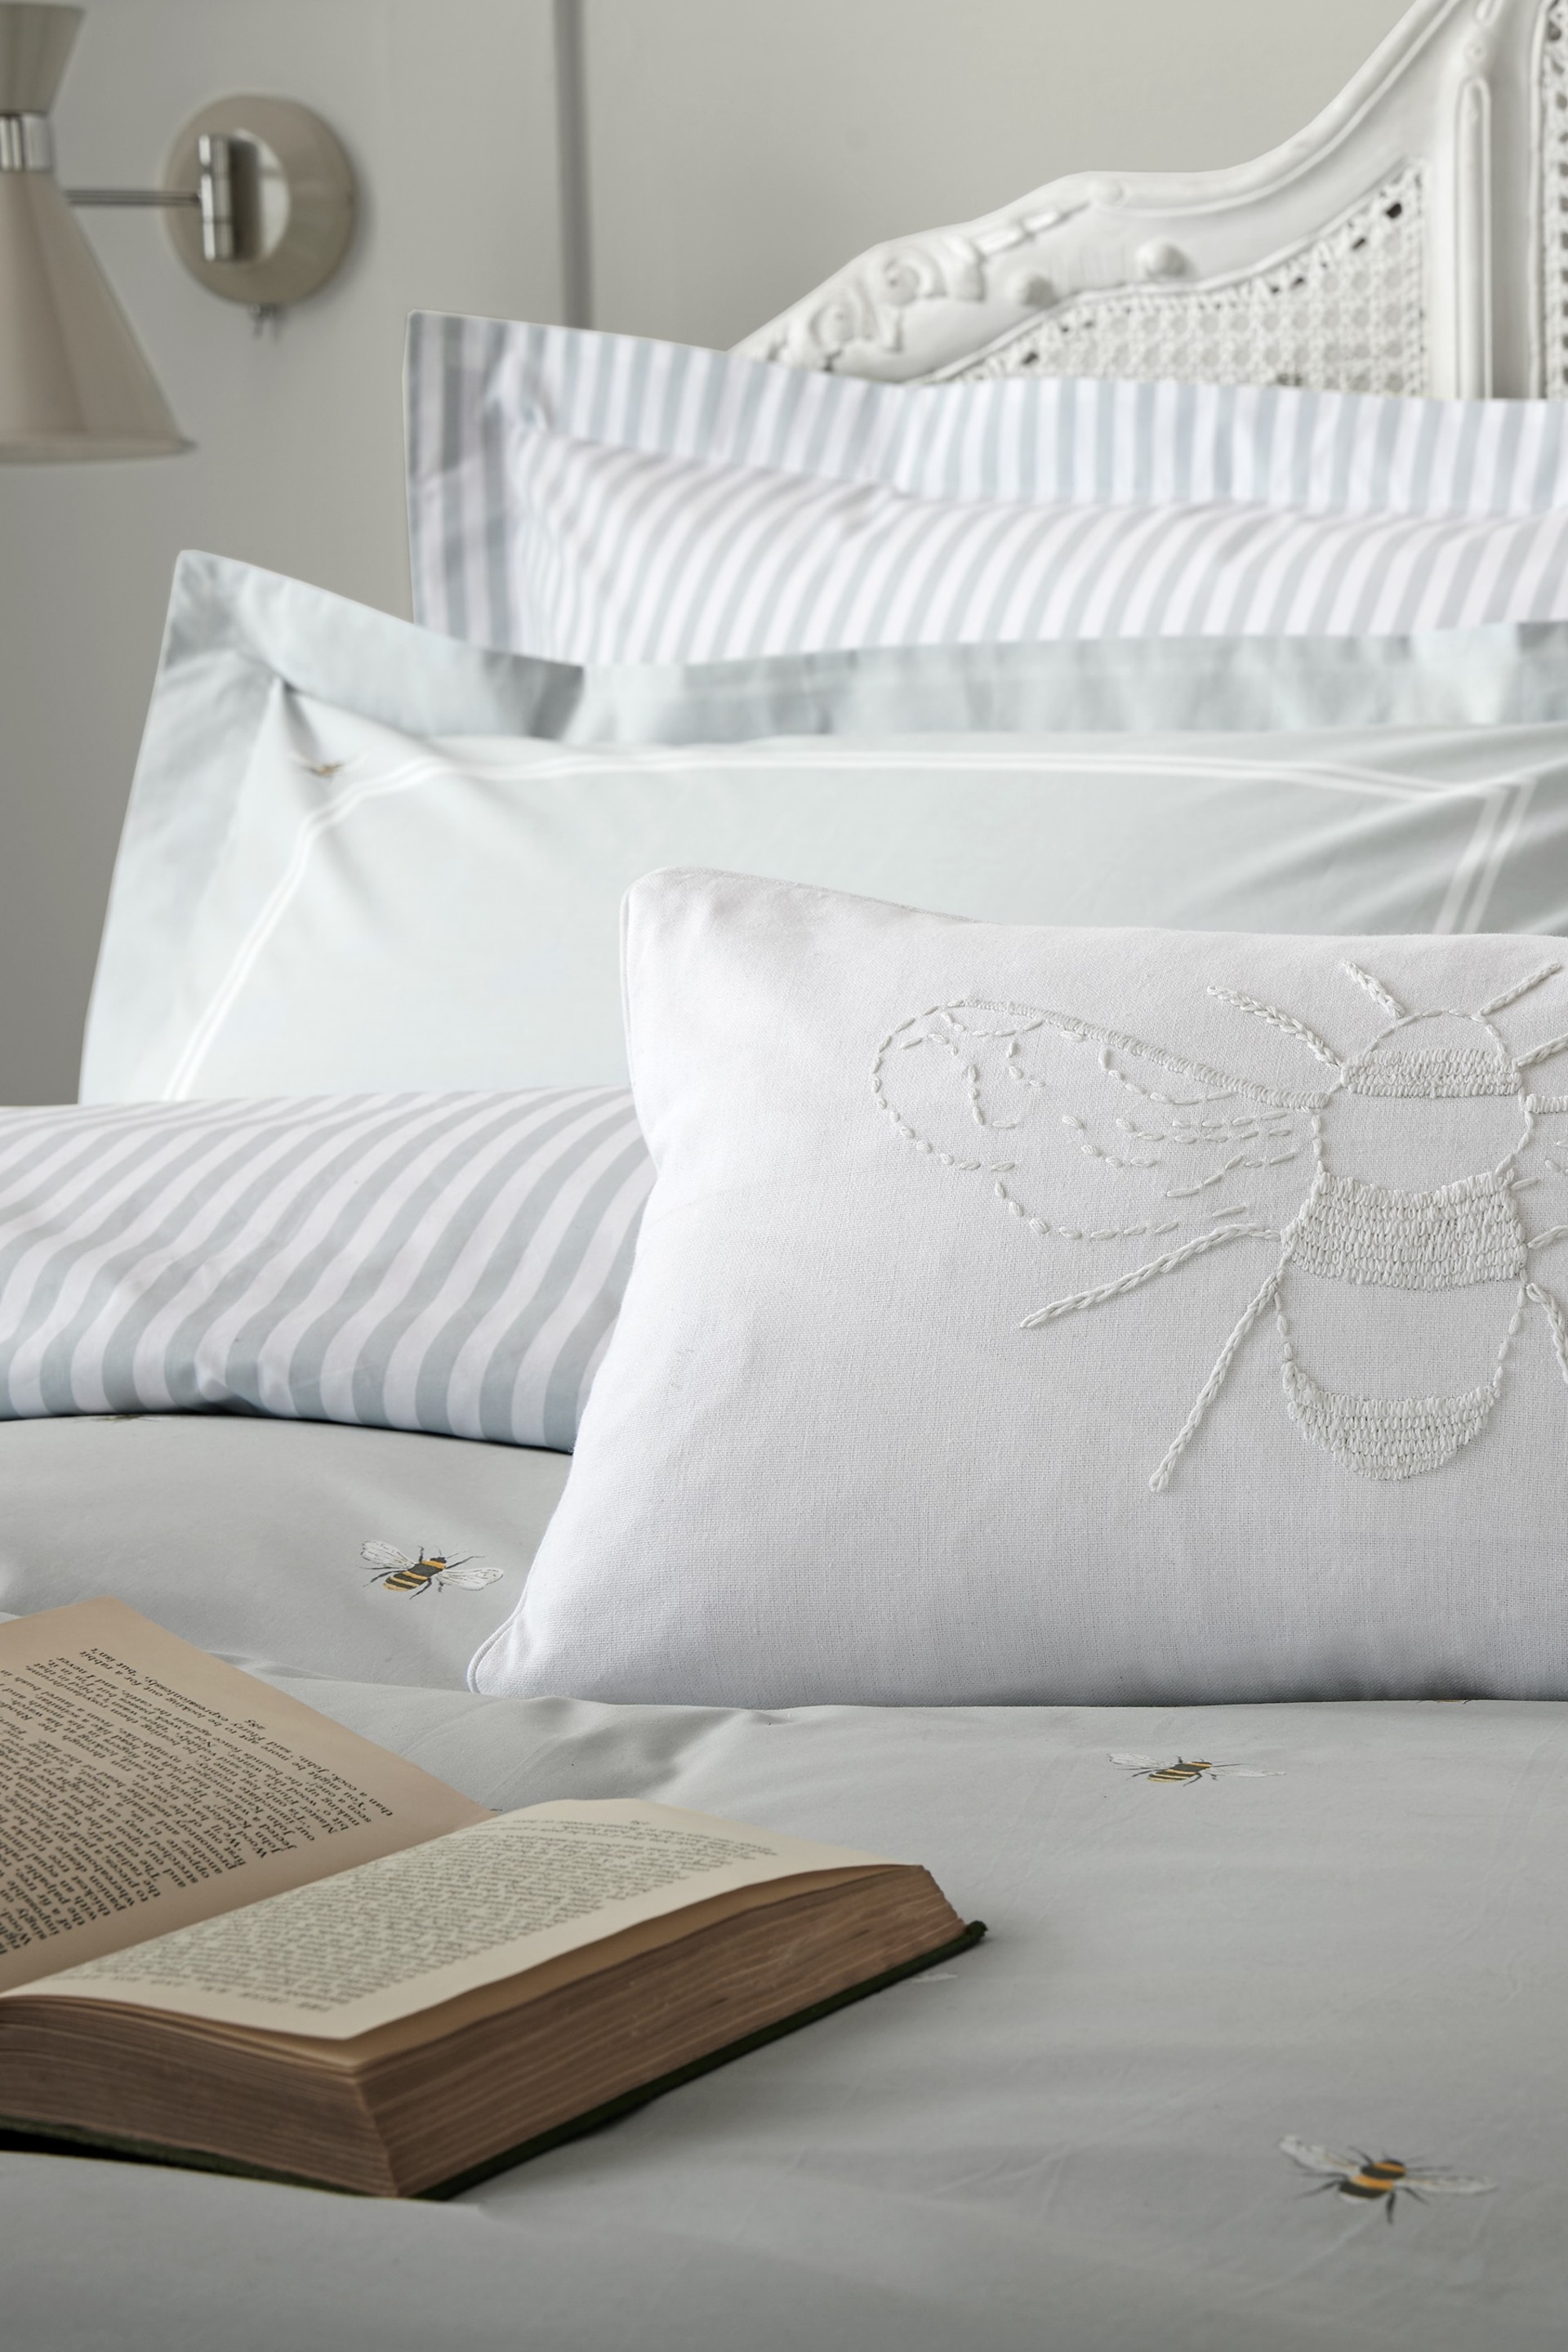 Sophie Allport Grey Bees Cotton Duvet Cover and Pillowcase Set - Image 2 of 2